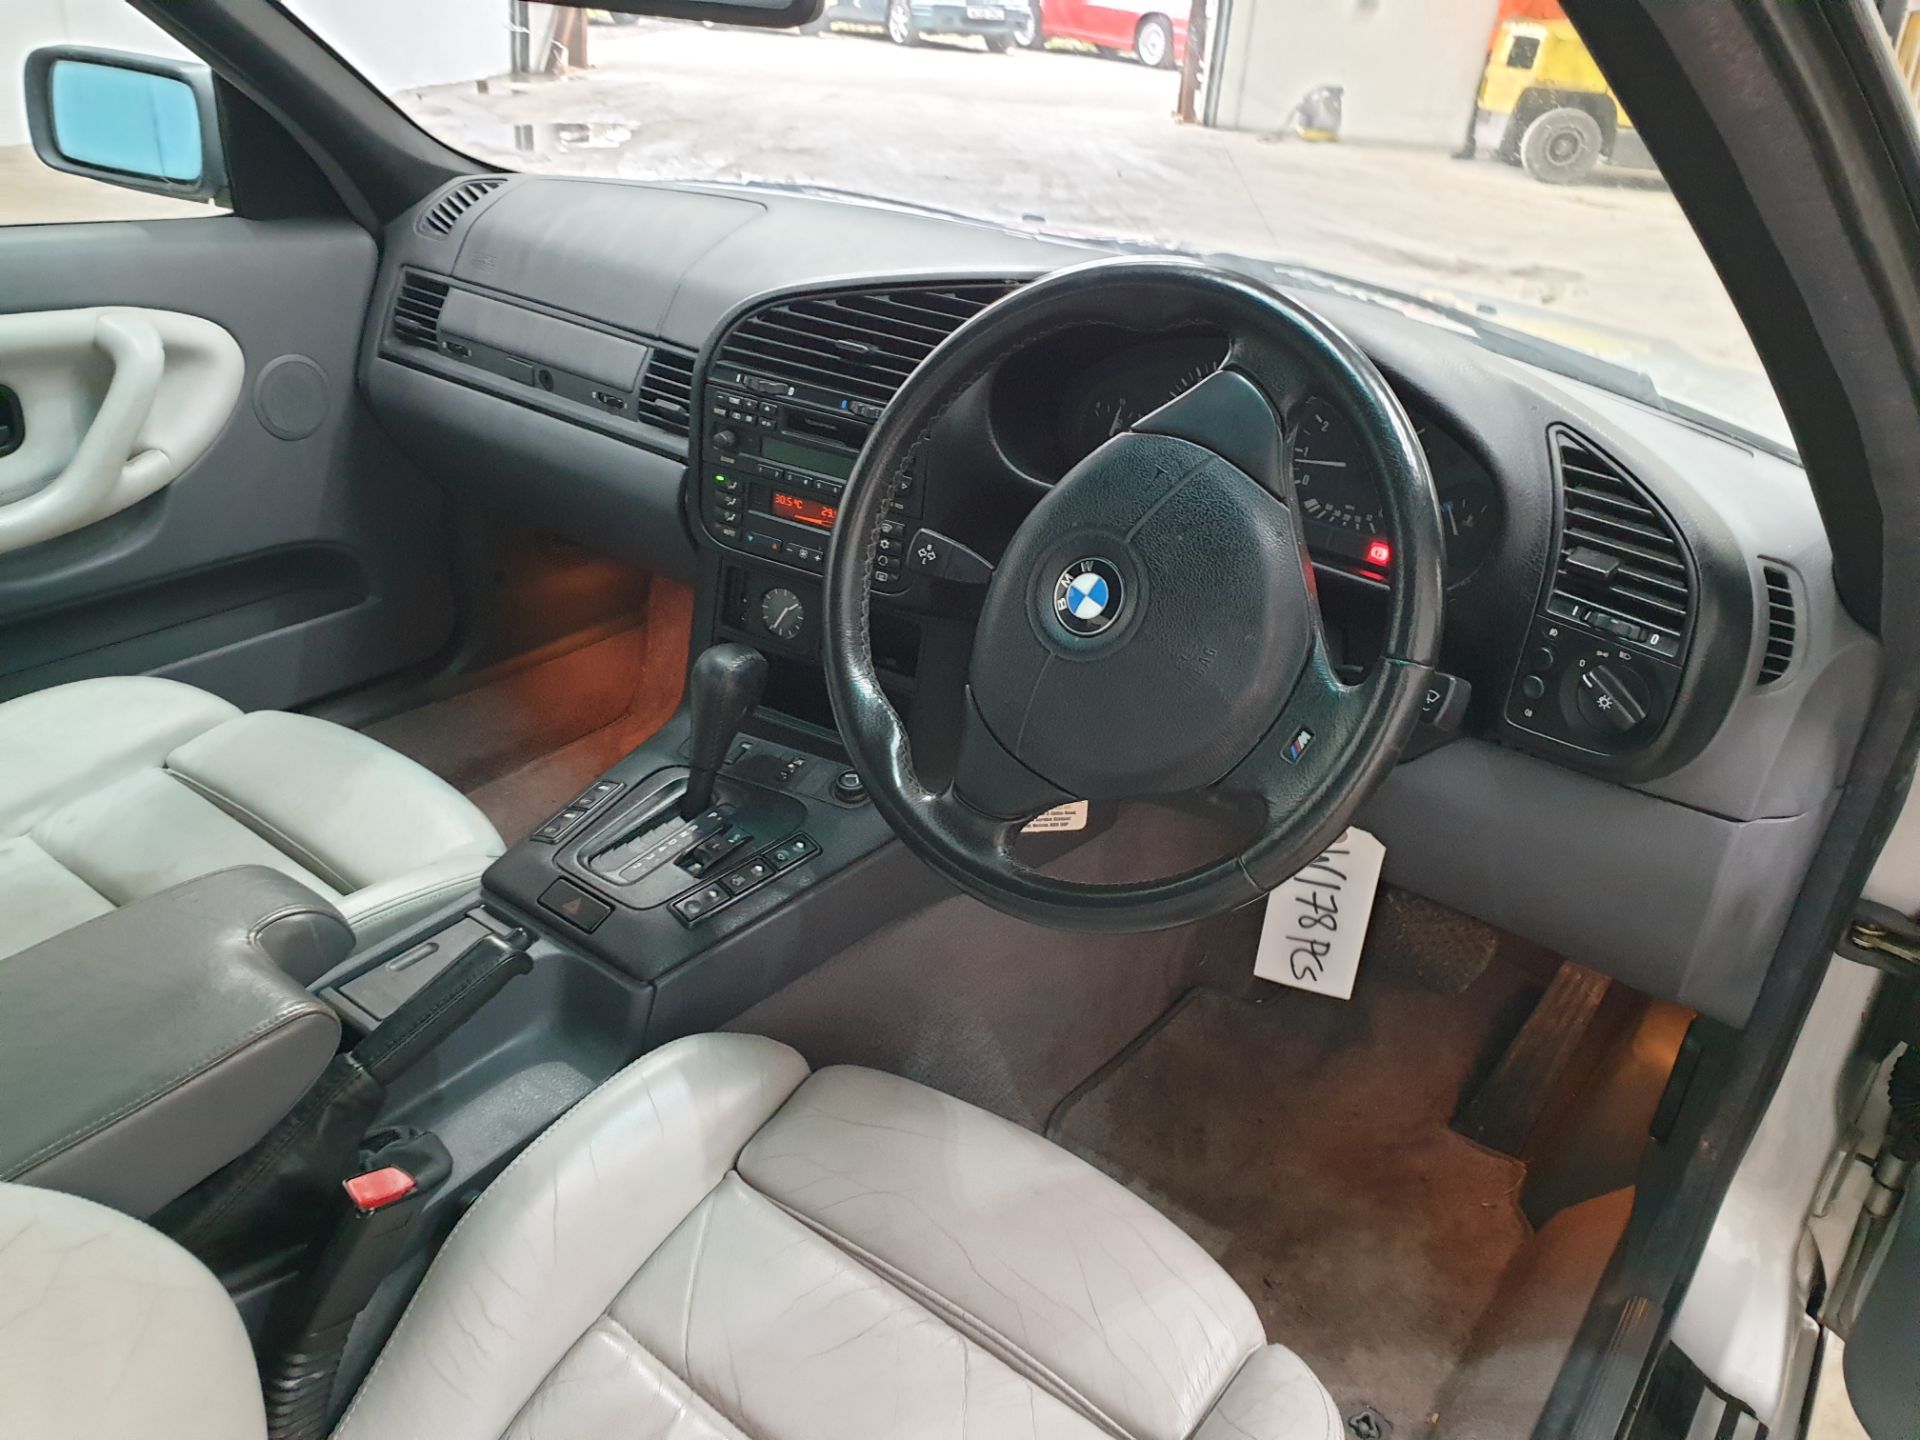 BMW 323 Convertible - Image 11 of 13